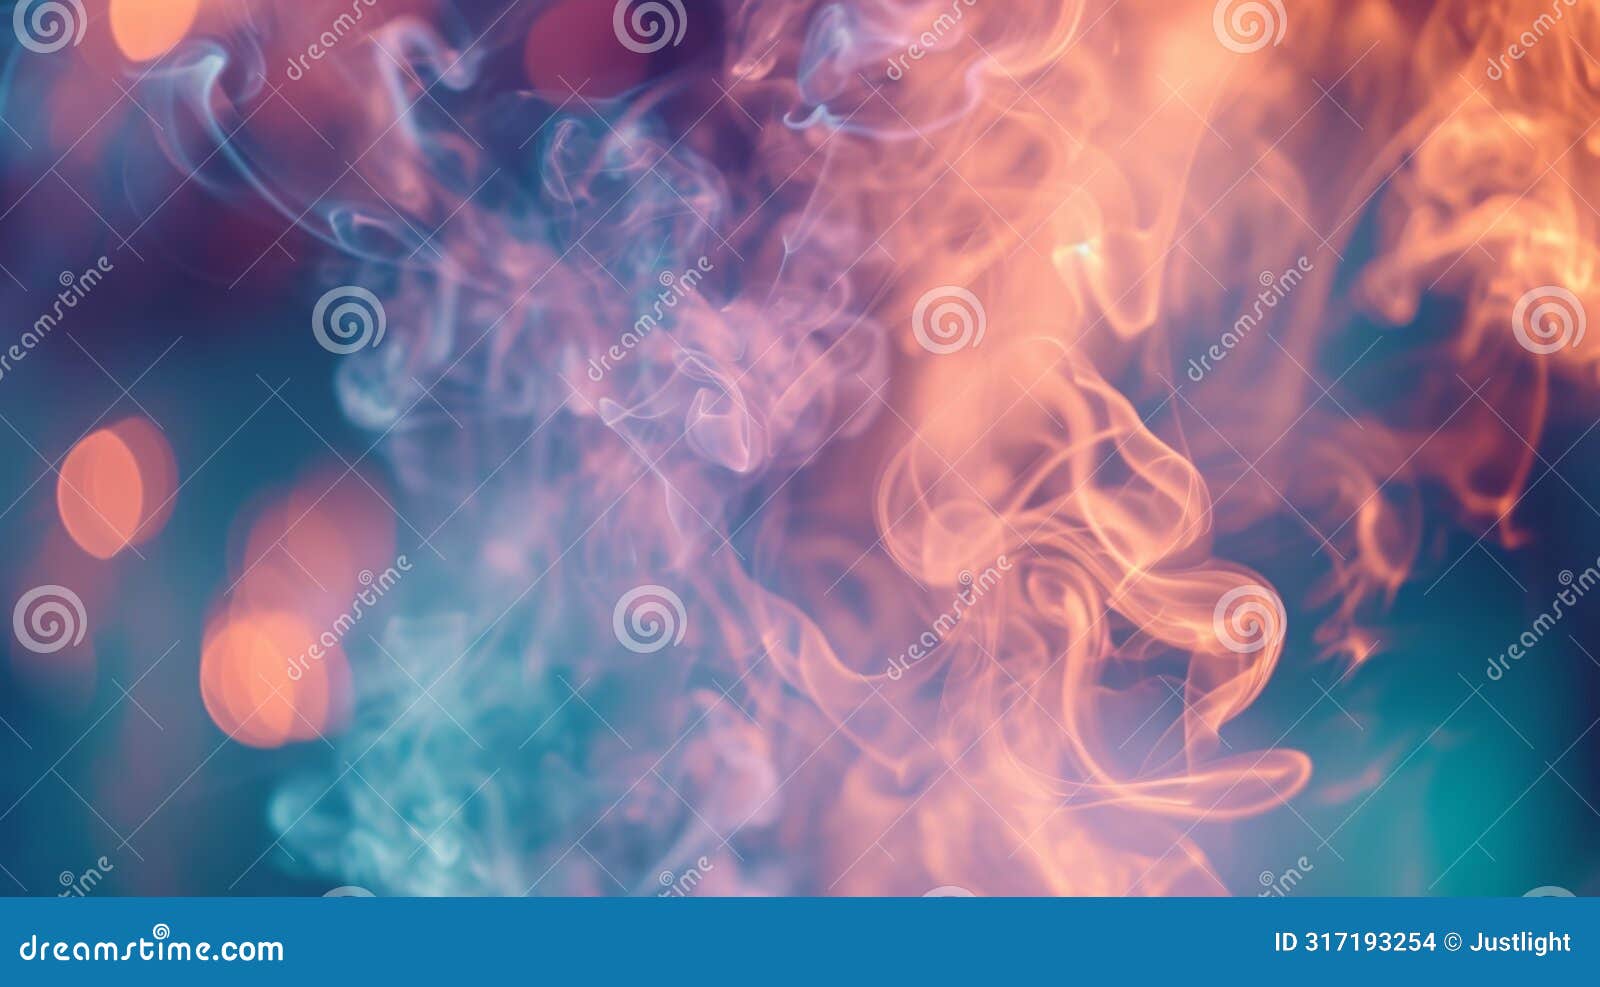 a dreamlike haze of smoke weaves through the air forming graceful and intricate swirls that seem to dance to an